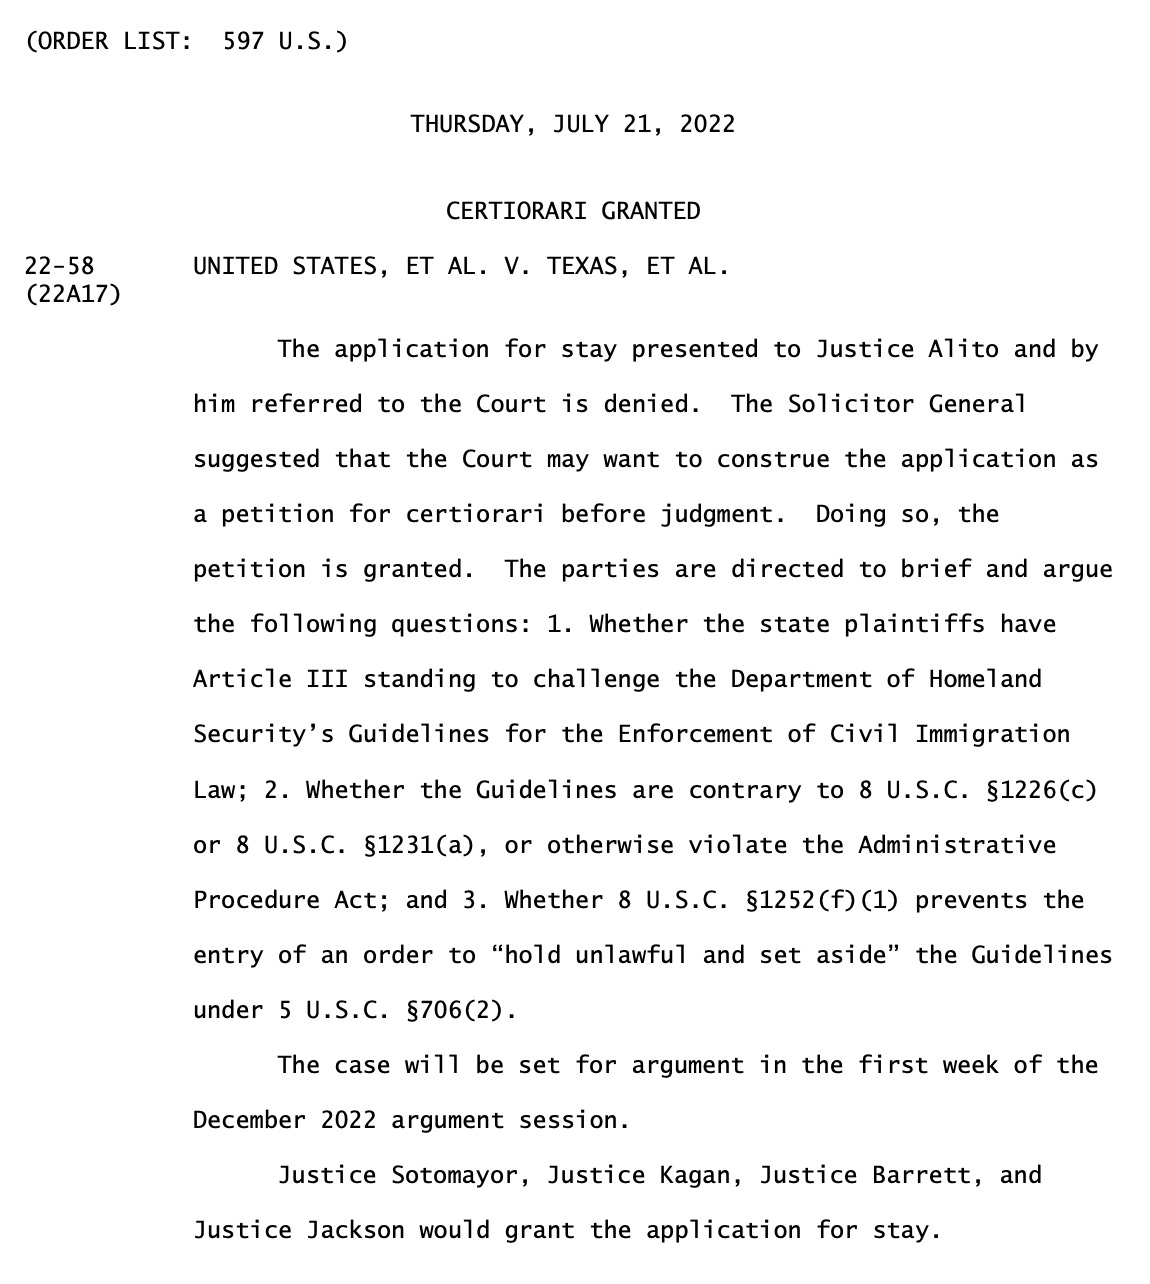 "UNITED STATES, ET AL. V. TEXAS, ET AL. The application for stay presented to Justice Alito and by him referred to the Court is denied. The Solicitor General suggested that the Court may want to construe the application as a petition for certiorari before judgment. Doing so, the petition is granted. The parties are directed to brief and argue the following questions: 1. Whether the state plaintiffs have Article III standing to challenge the Department of Homeland Security’s Guidelines for the Enforcement of Civil Immigration Law; 2. Whether the Guidelines are contrary to 8 U.S.C. §1226(c) or 8 U.S.C. §1231(a), or otherwise violate the Administrative Procedure Act; and 3. Whether 8 U.S.C. §1252(f)(1) prevents the entry of an order to “hold unlawful and set aside” the Guidelines under 5 U.S.C. §706(2). The case will be set for argument in the first week of the December 2022 argument session. Justice Sotomayor, Justice Kagan, Justice Barrett, and Justice Jackson would grant the application for stay."